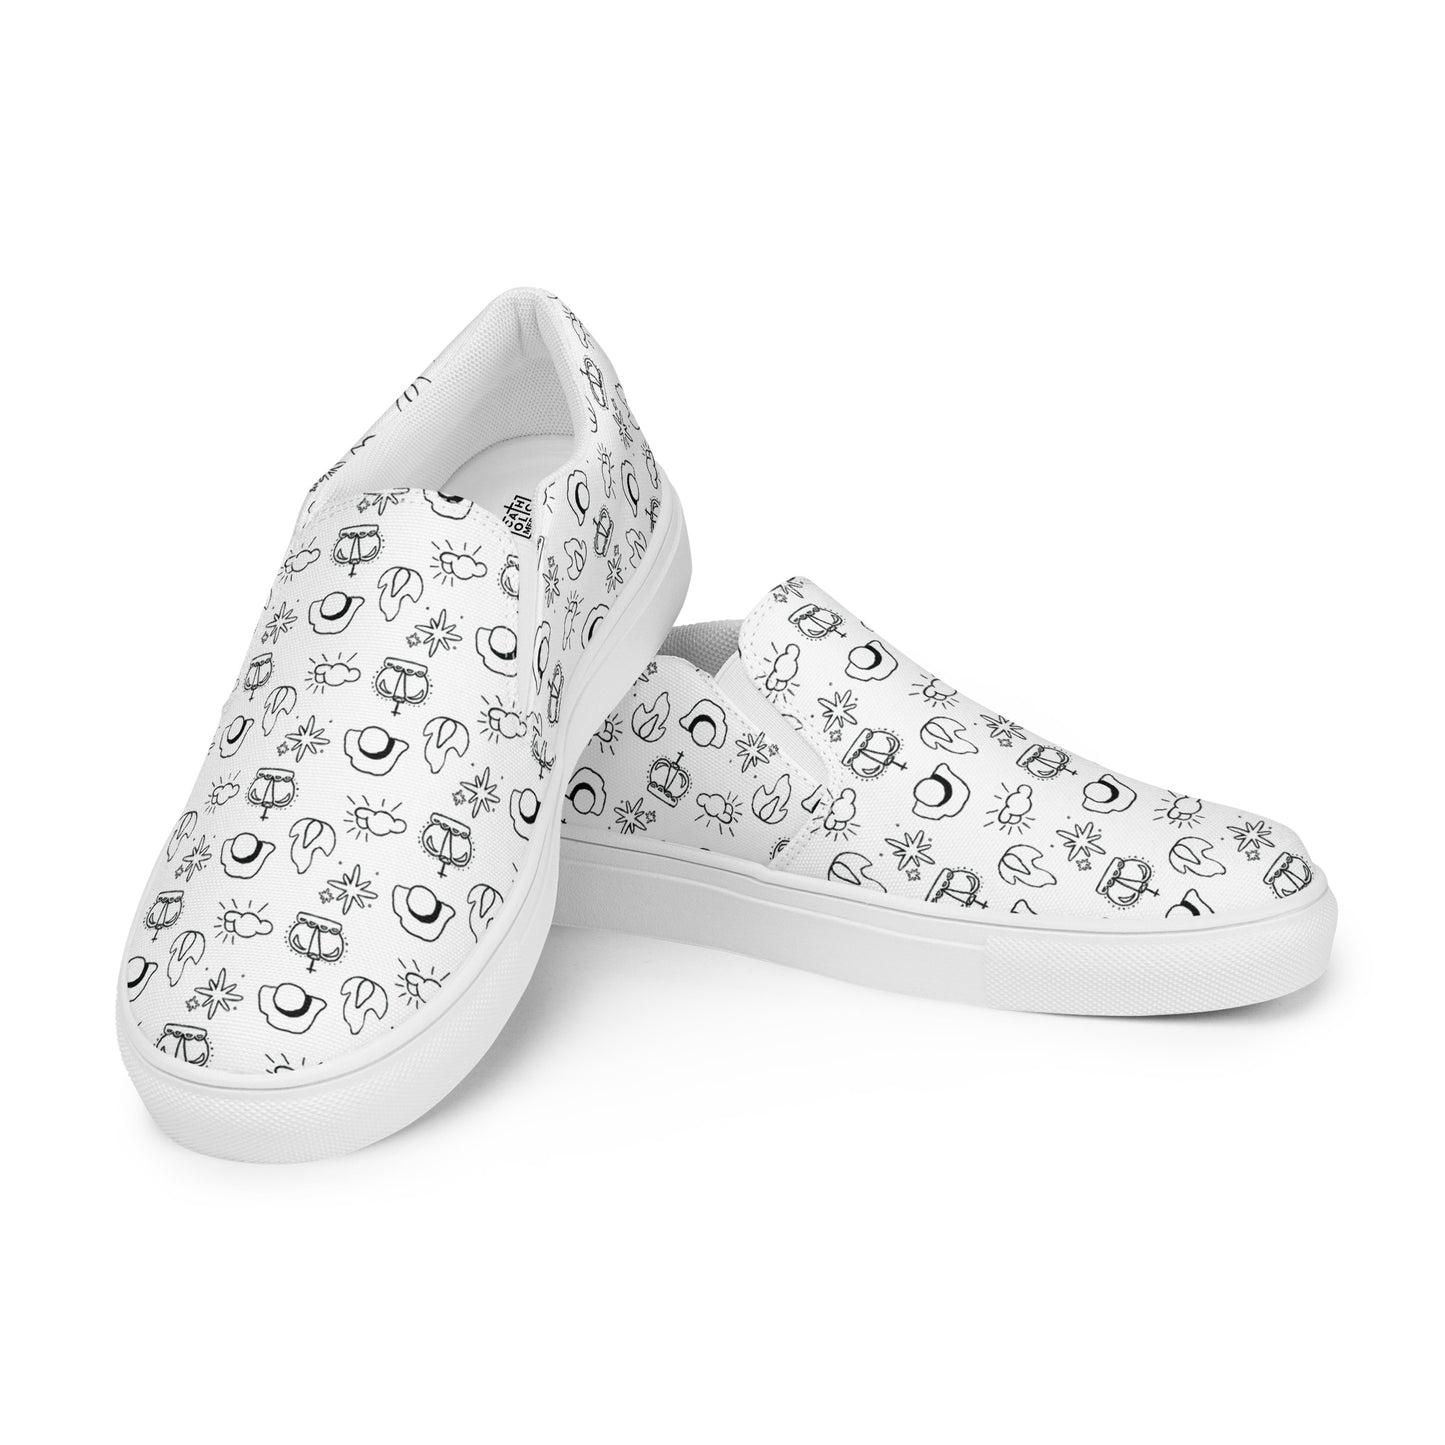 "Walking with the Saints | Glorious Mysteries" – Women’s Slip-On's